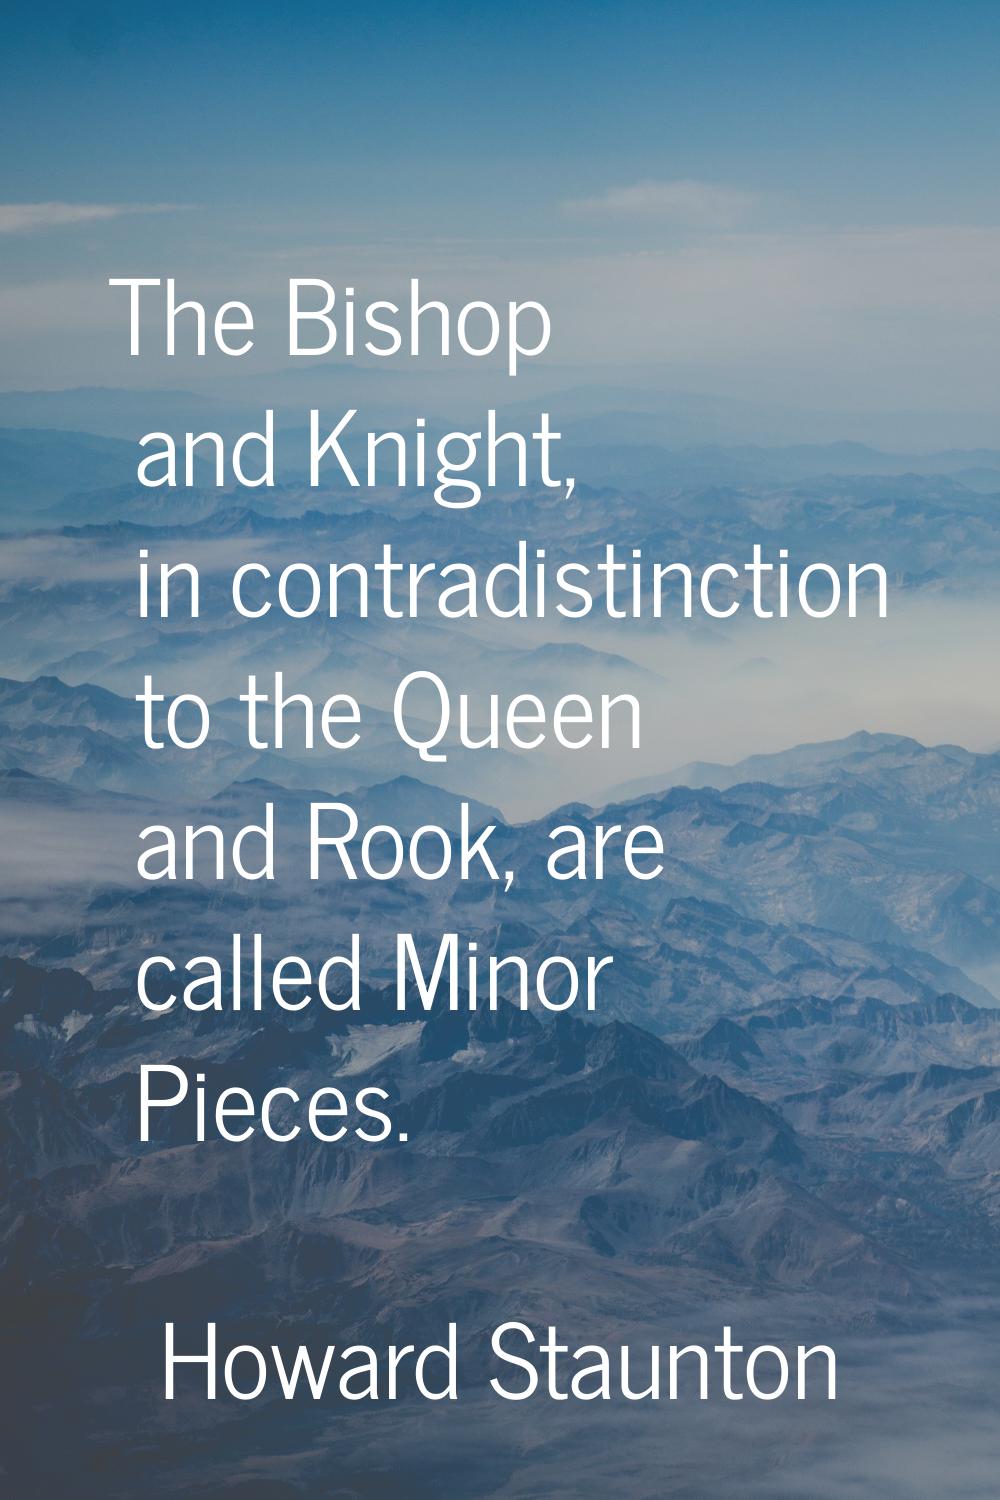 The Bishop and Knight, in contradistinction to the Queen and Rook, are called Minor Pieces.